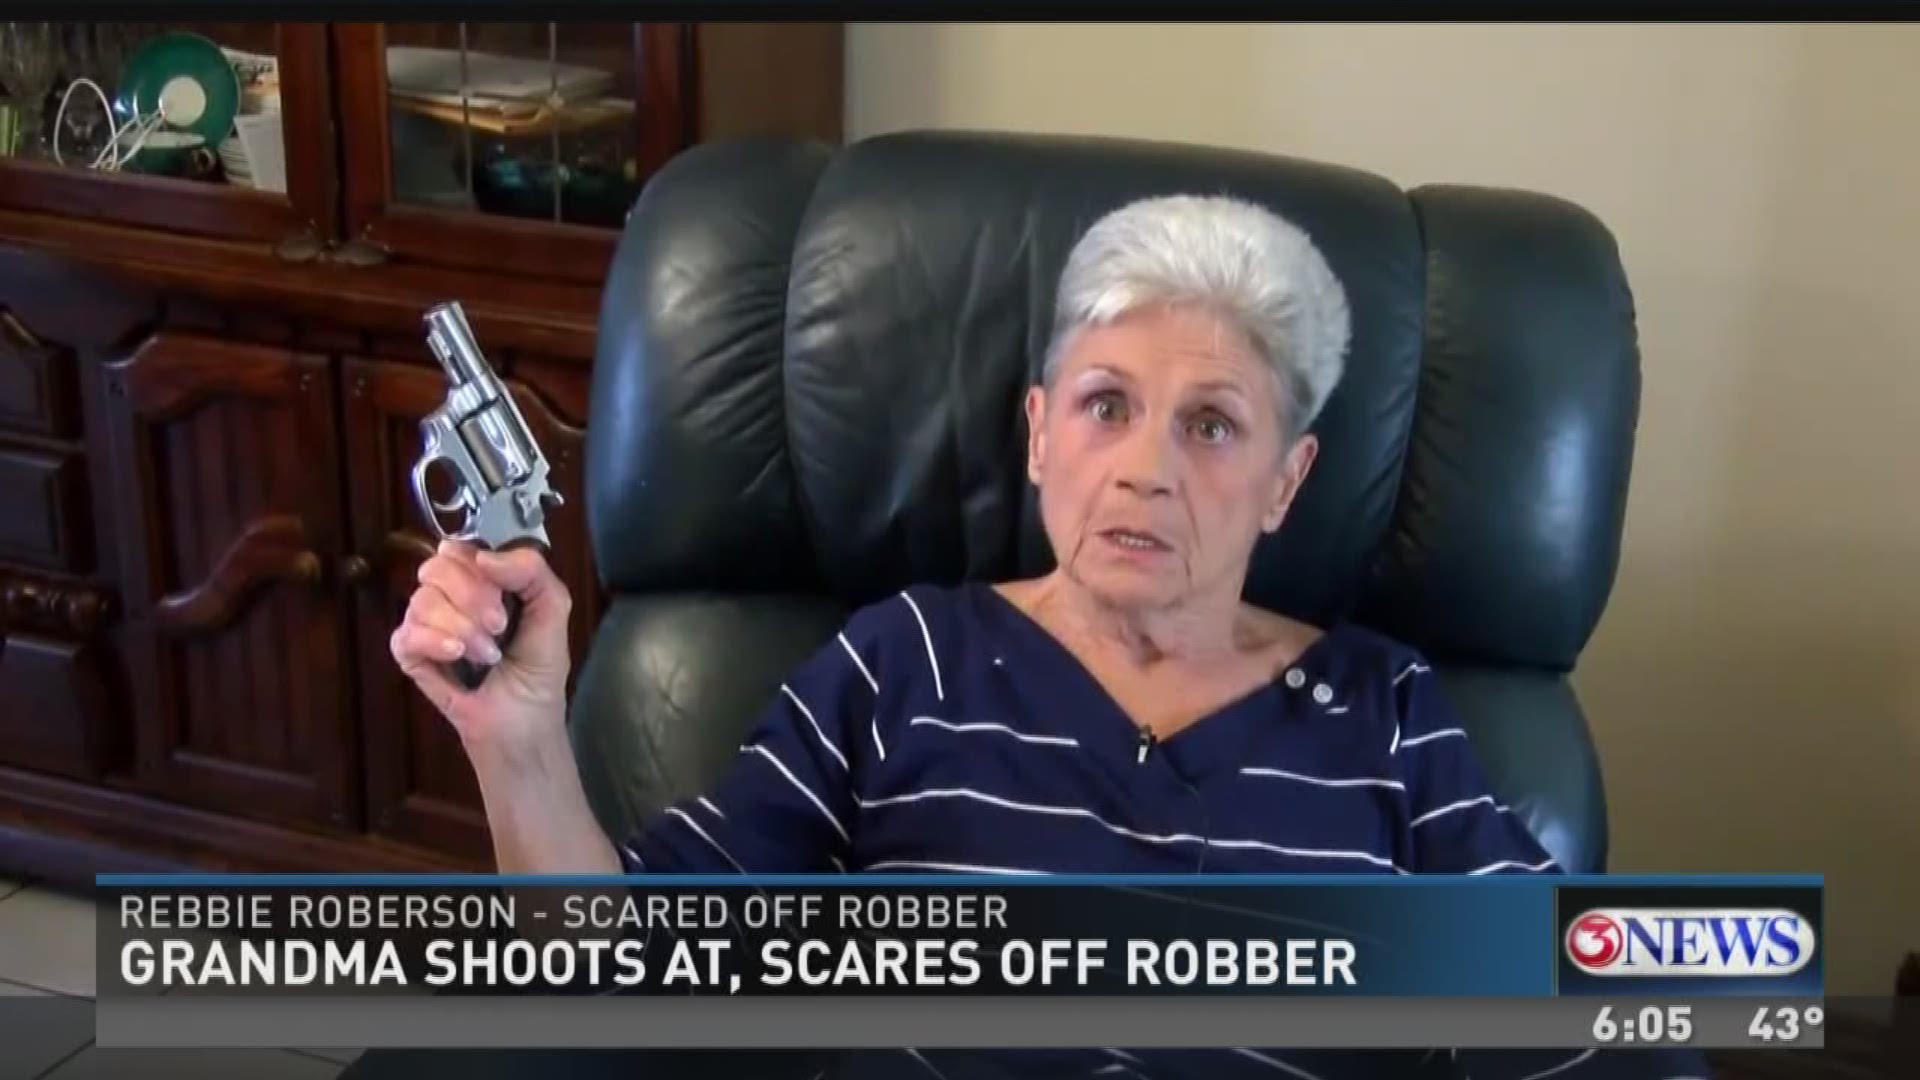 A Texas grandma was not about to go down without a fight.